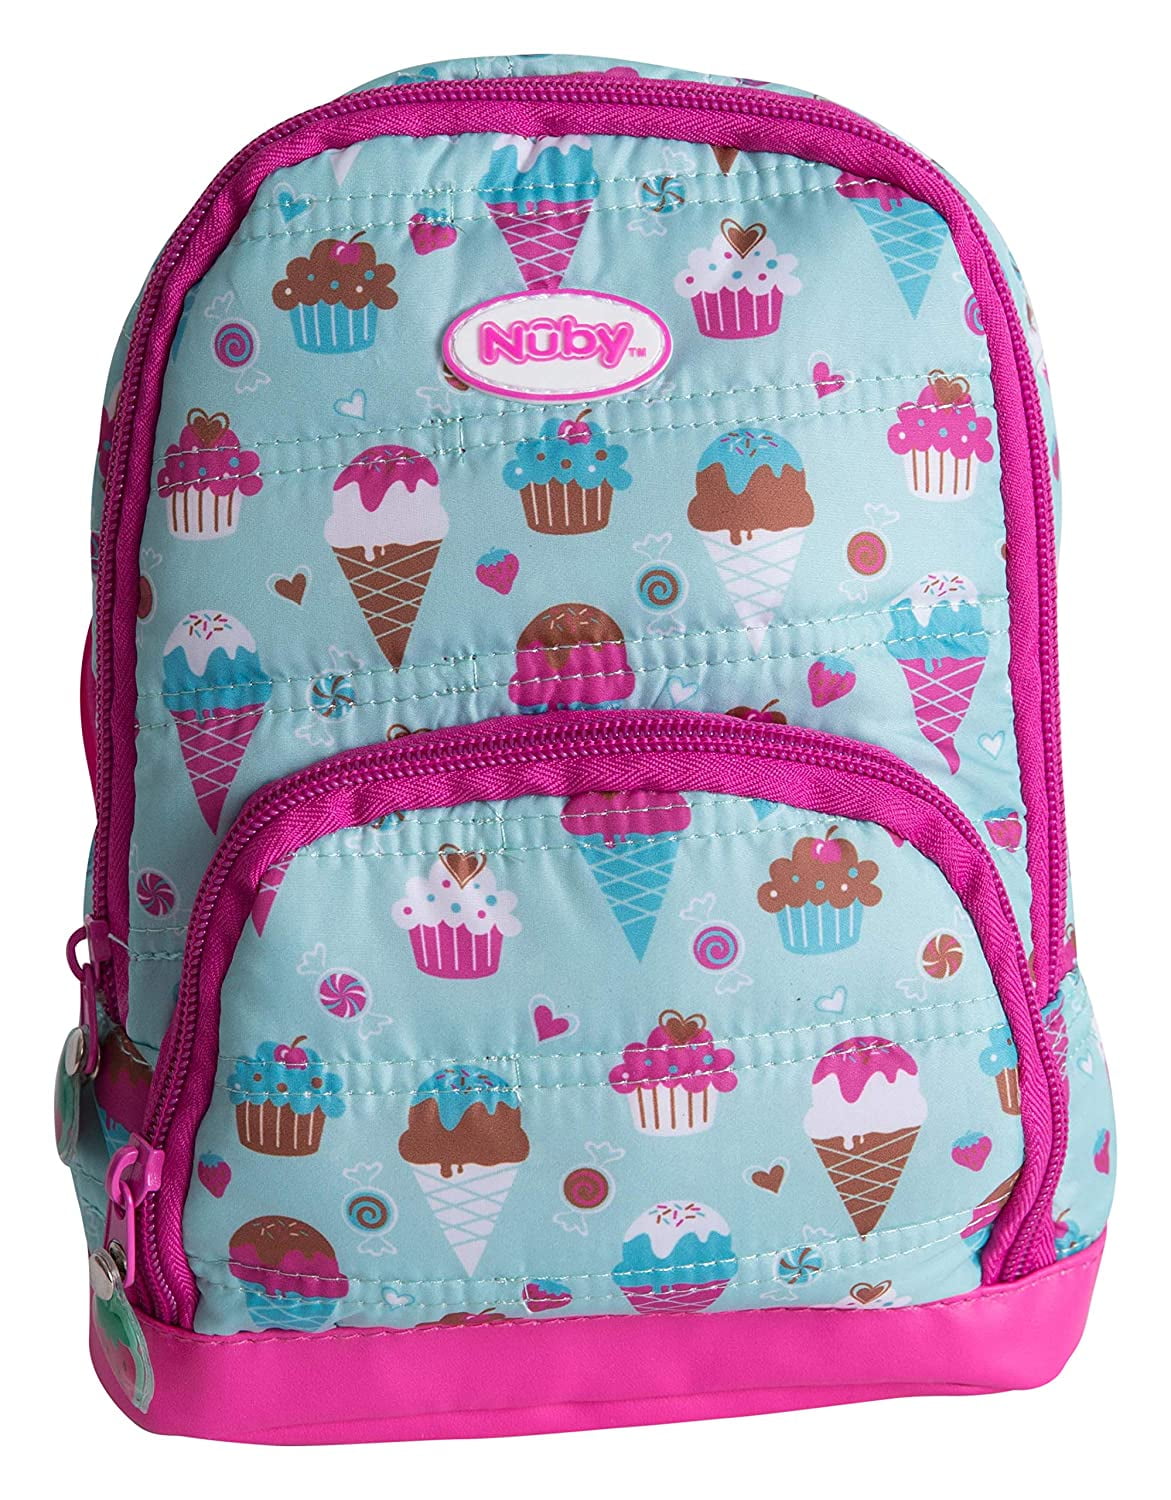 Nuby Quilted Sweet Girl Backpack with Safety Harness Leash Child Baby Toddler Travel 